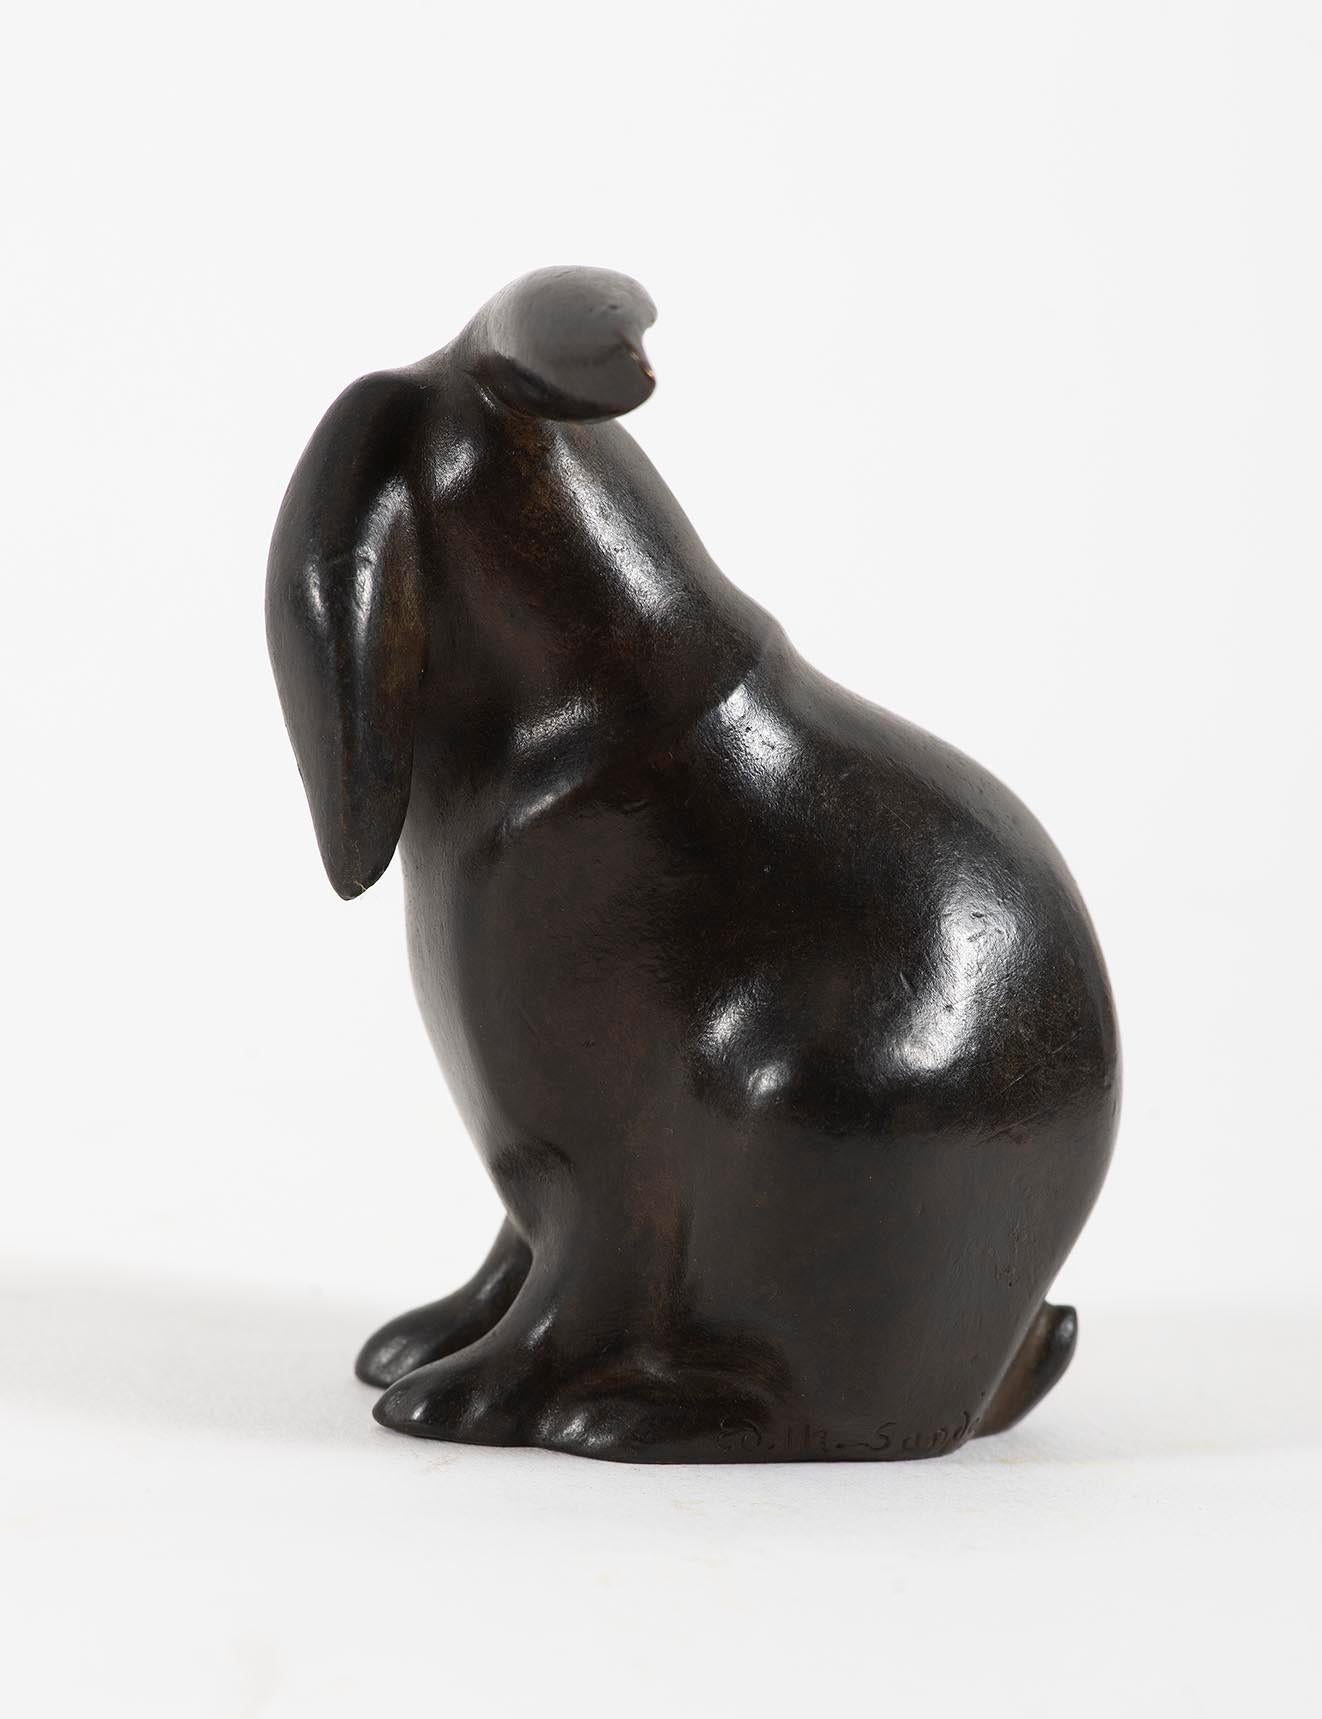 Lapin assis, tête tournée, circa 1919-1921
Fondry Susse, Ed. 3/5 pcs
circa 1919-1921
Rare bronze proof with a brown patina
8.5 x 5.5 x 6.5 cm
Certificate of authenticity issued by the Fondation Edouard et Maurice Sandoz.
Signed on the back :